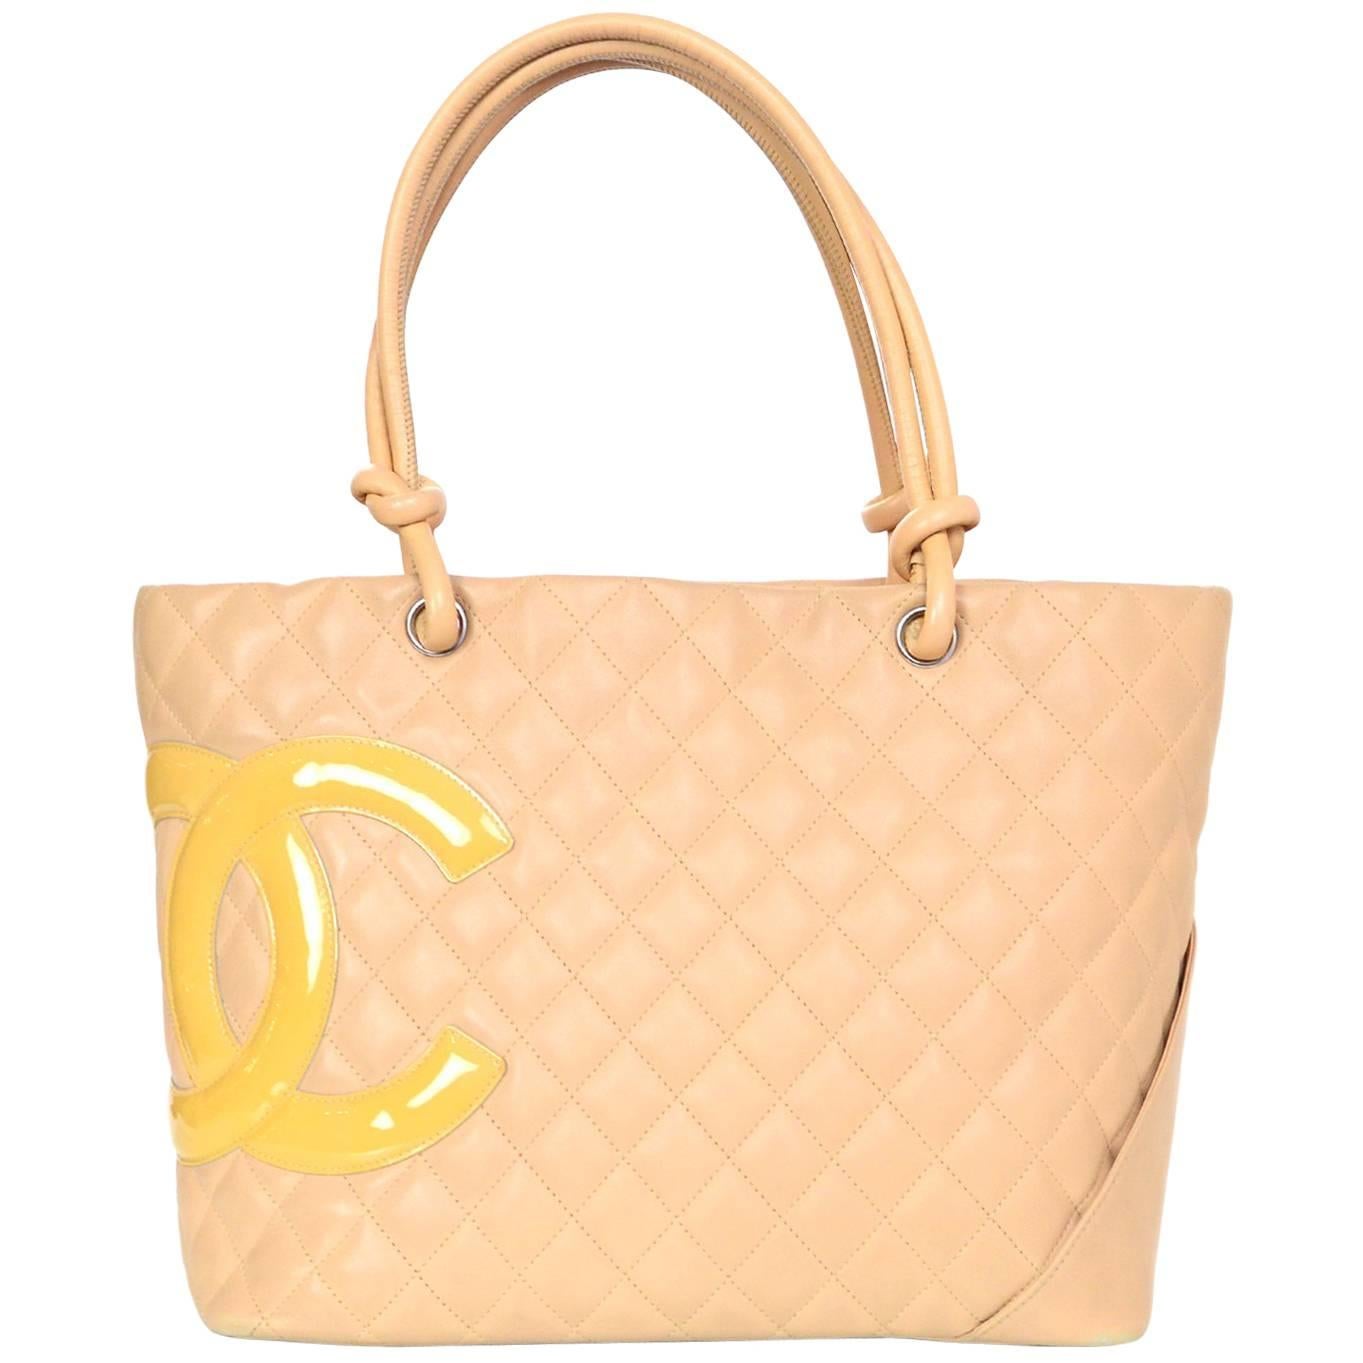 Chanel Beige Leather Quilted CC Cambon Tote Bag